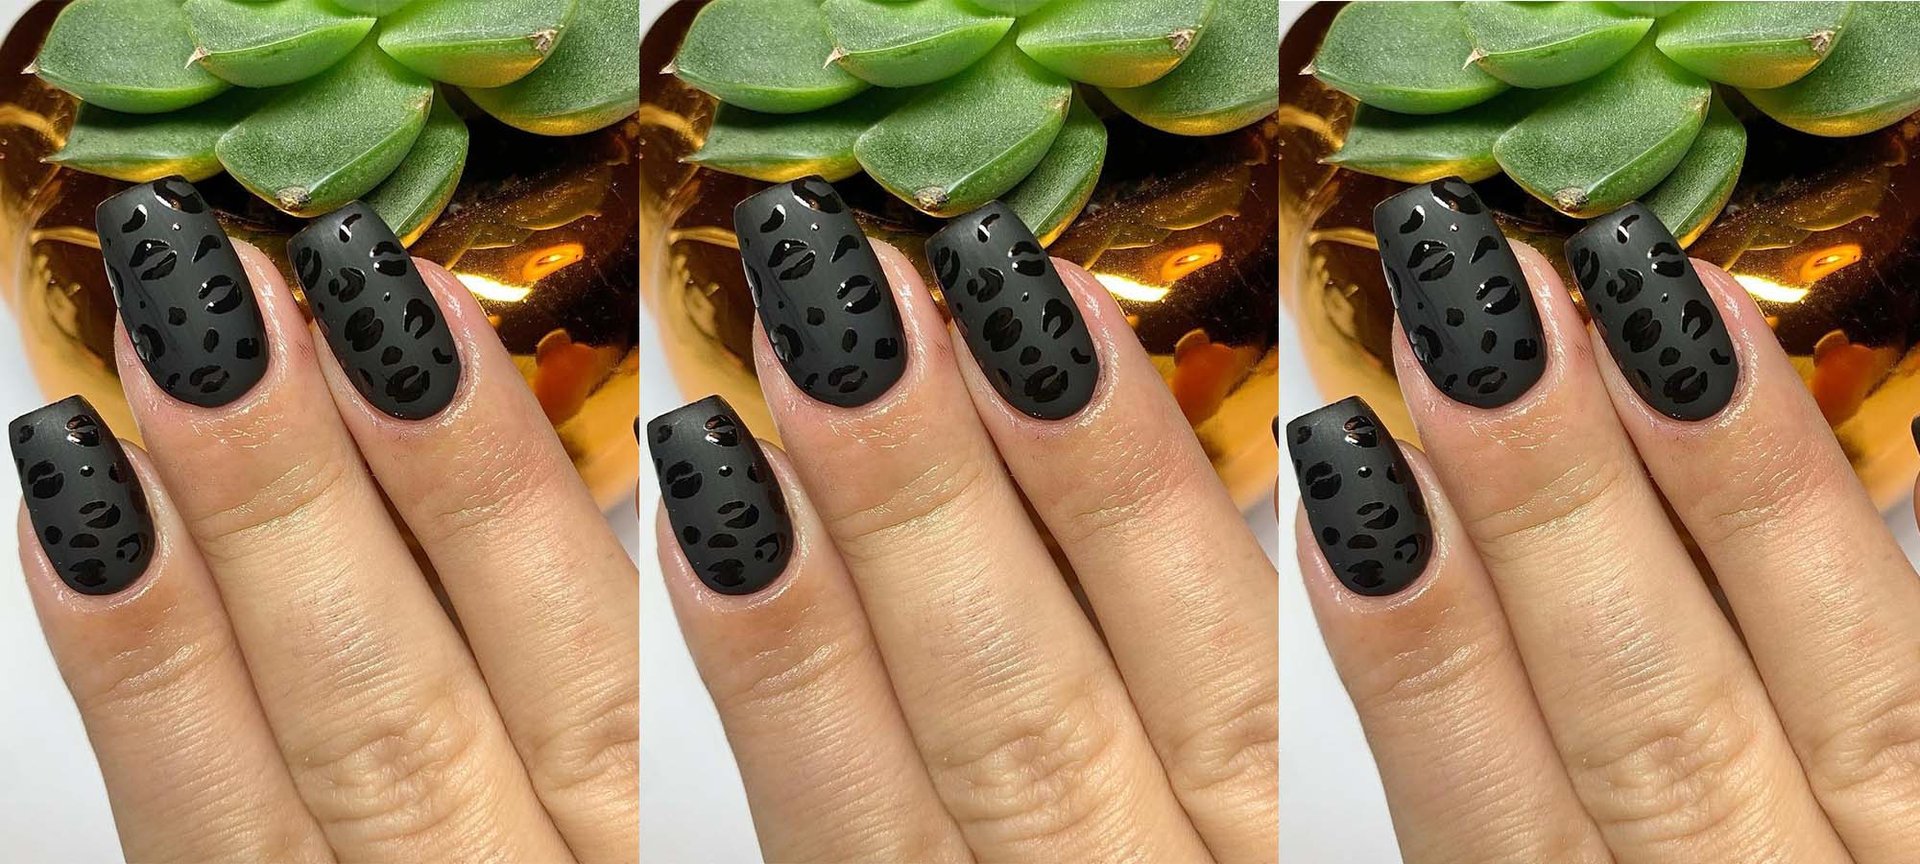 25 UltraPretty Fall Nail Designs To Let Your Fingertips Celebrate  AutumnCute DIY Projects